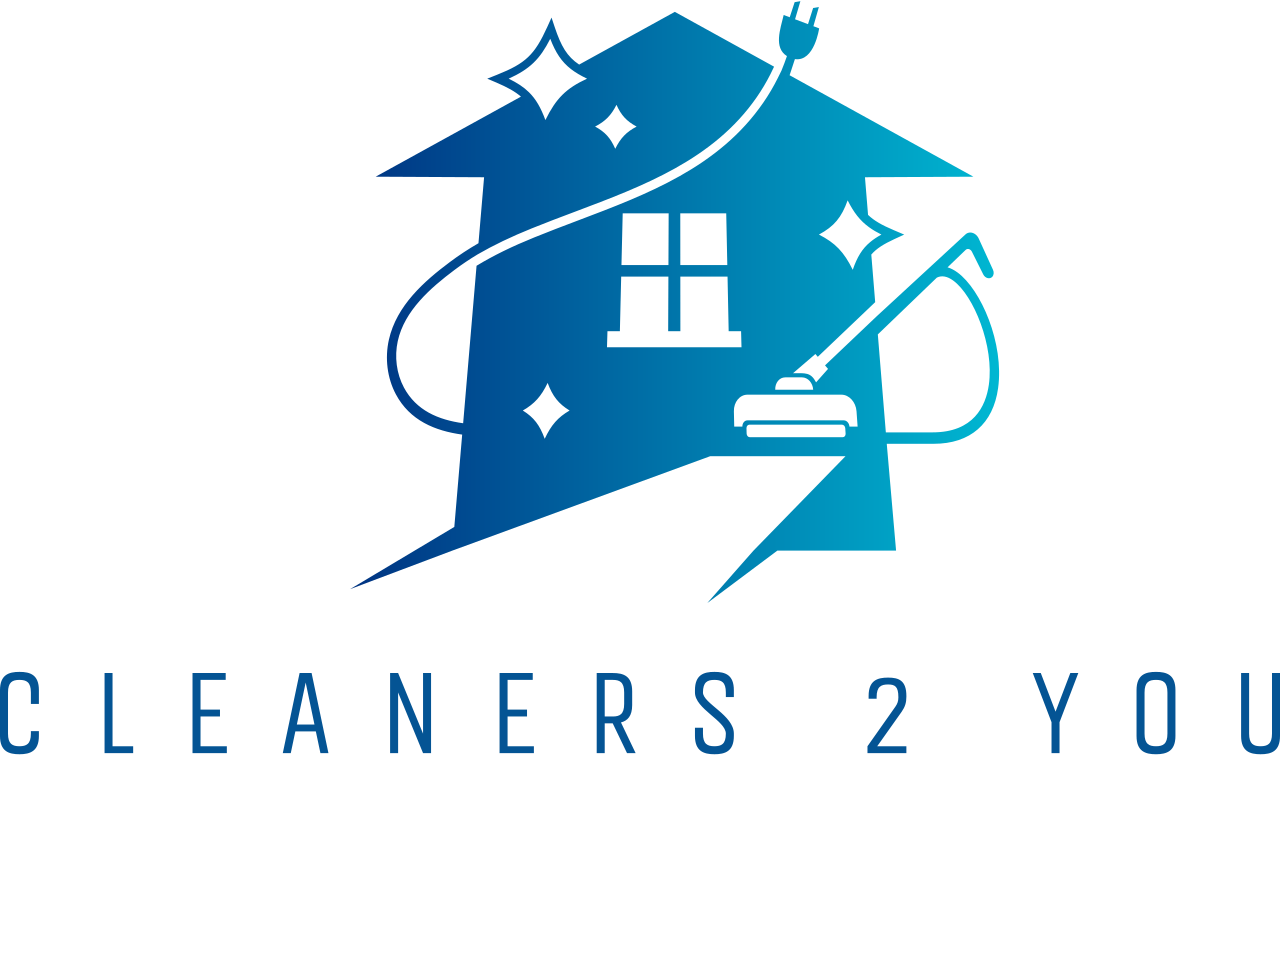 Cleaners 2 you 's logo